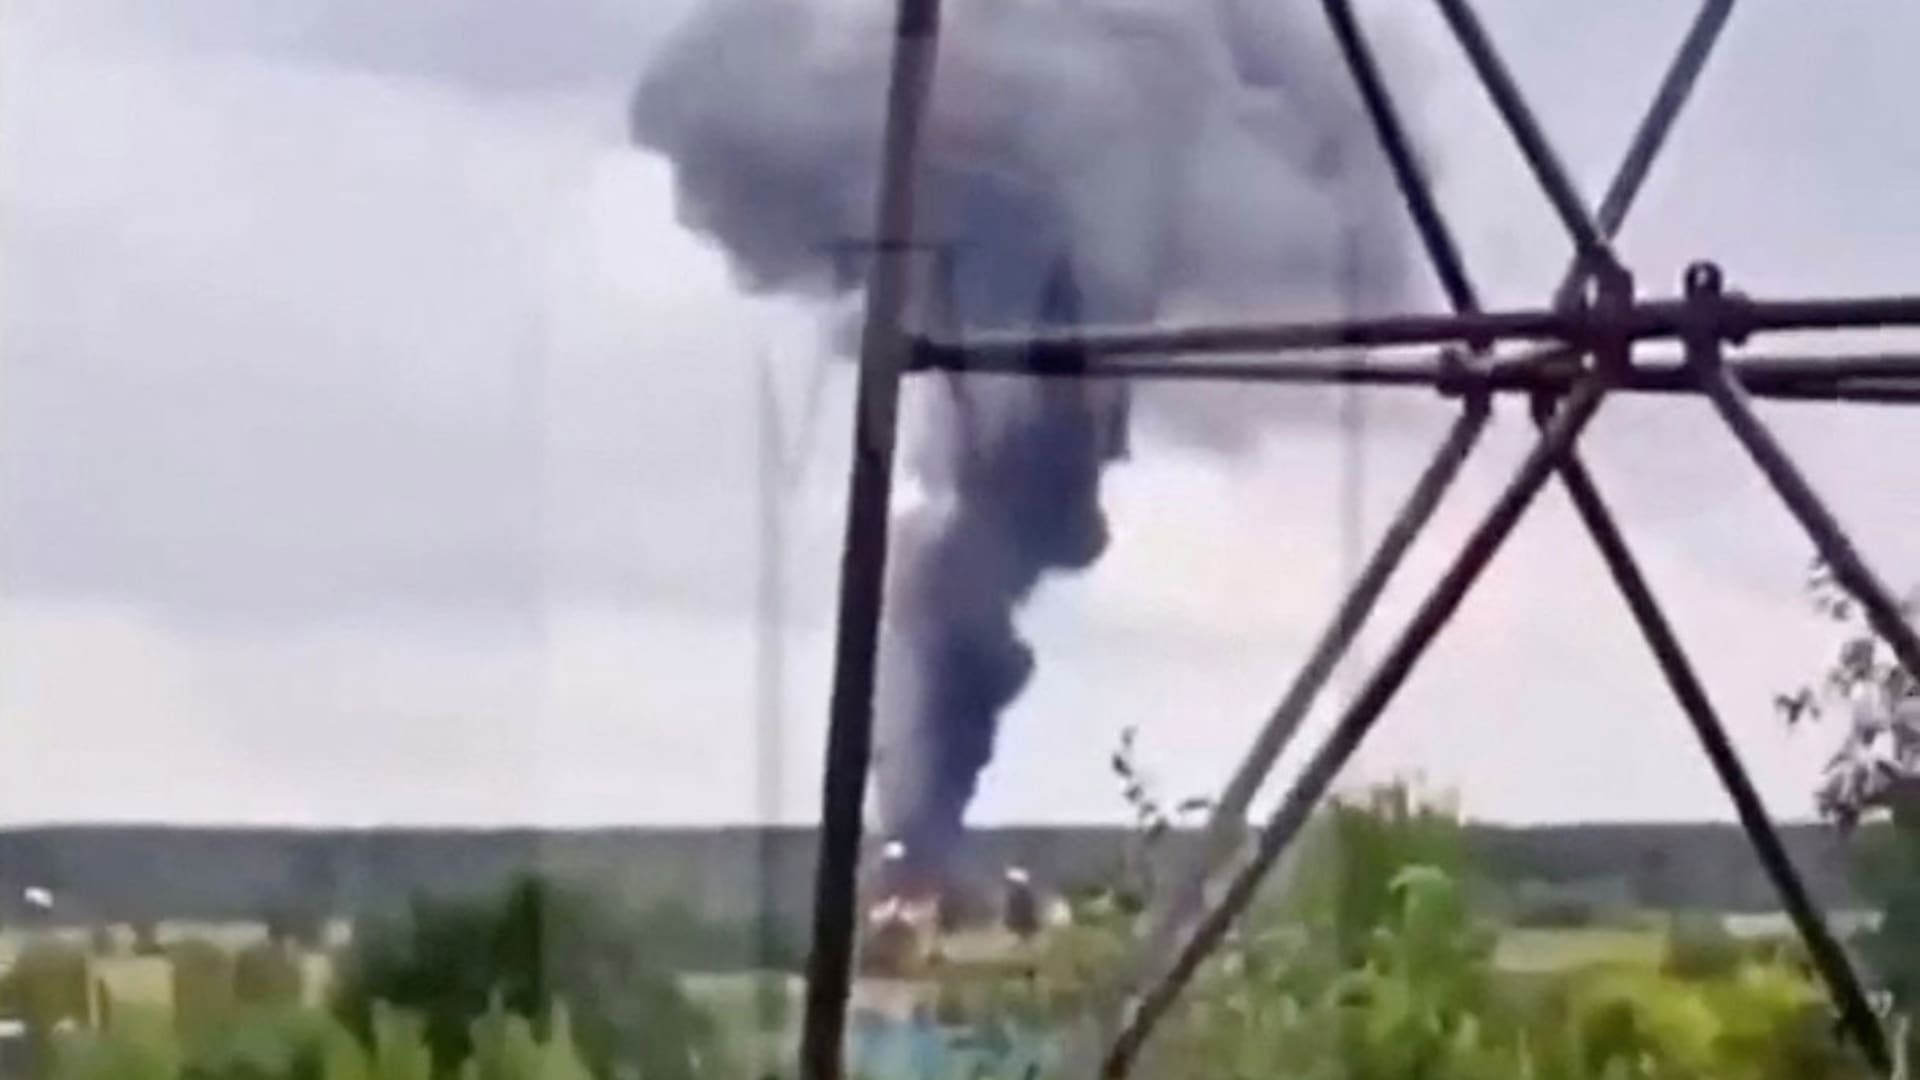 A view shows smoke rising above a plane on fire following an alleged air accident at a location given as Tver region, Russia, in this still image from video published August 23, 2023. Watermark from source.